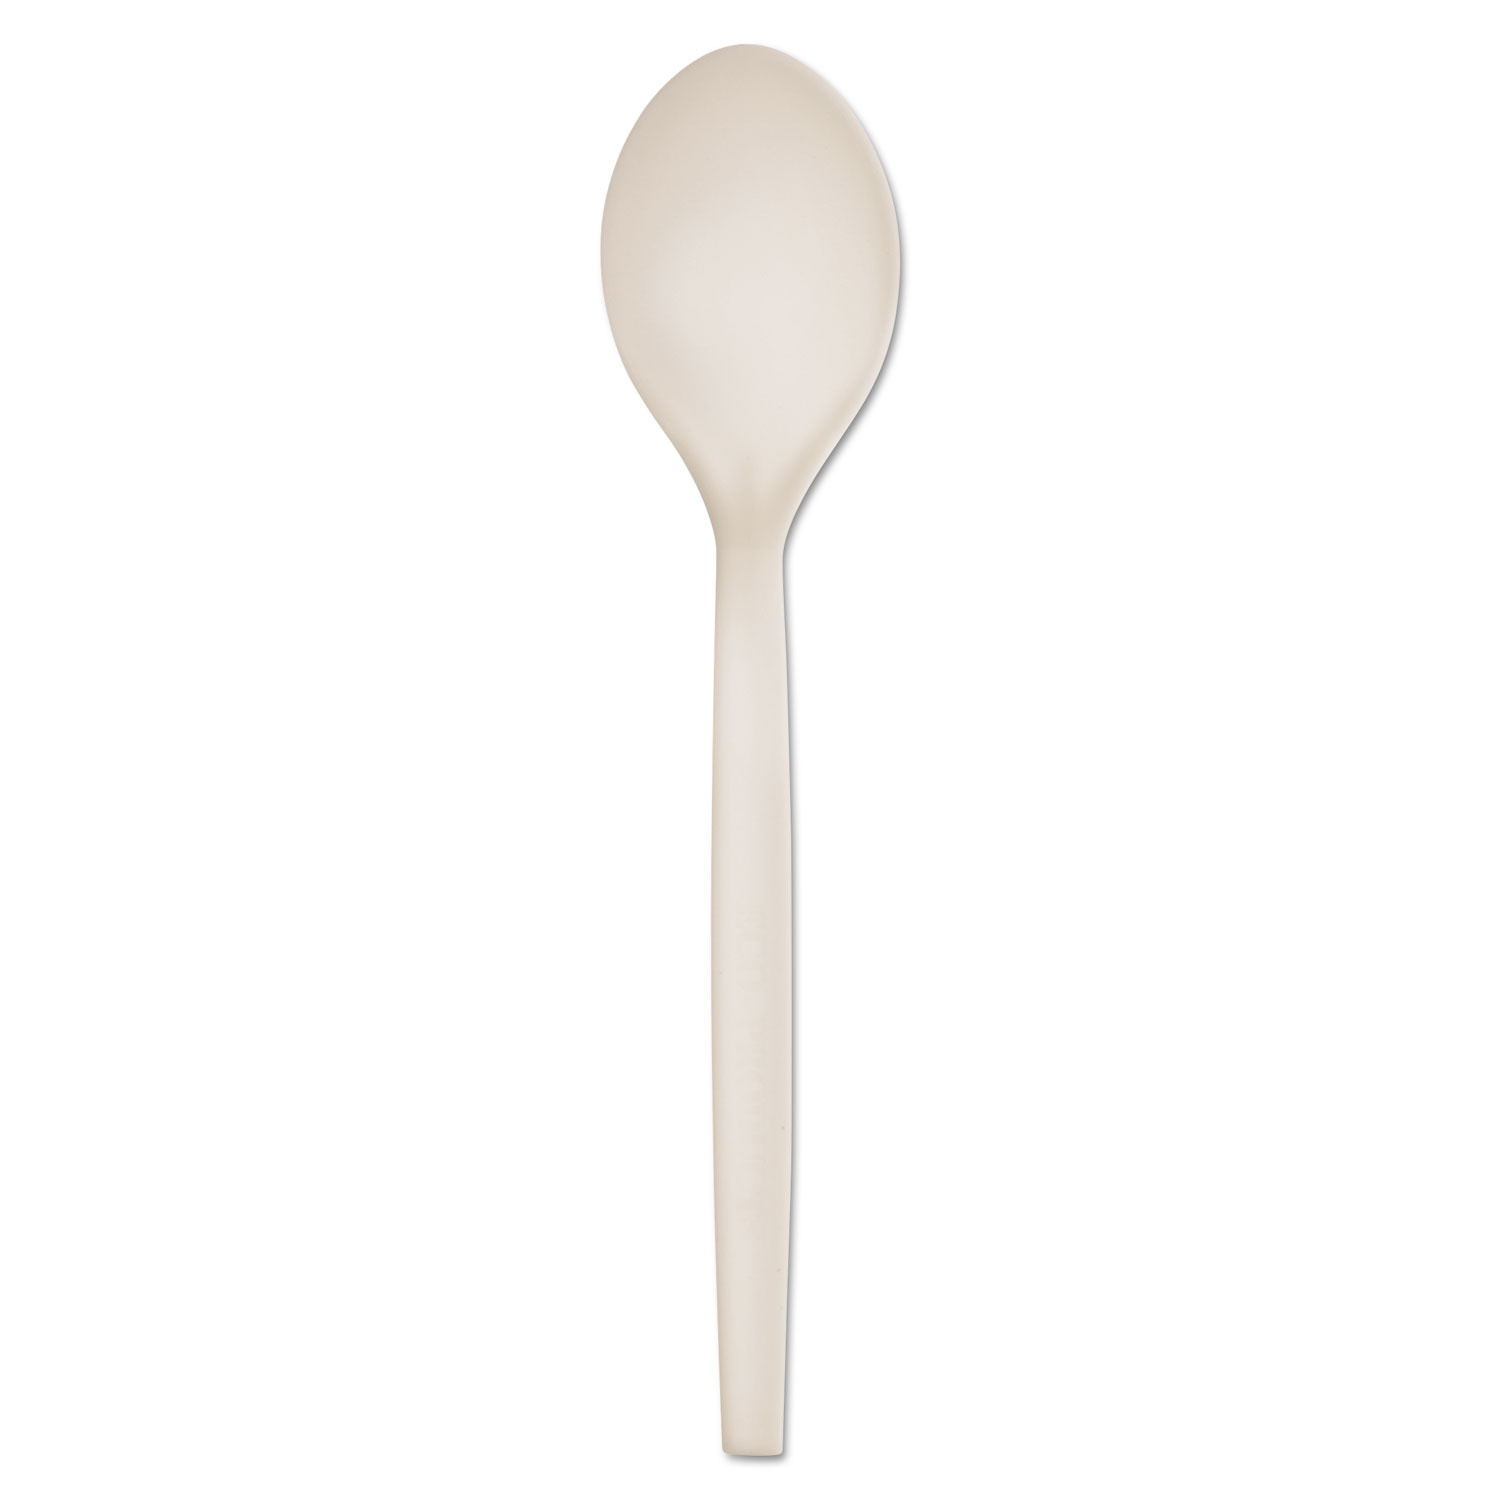  Eco-Products EP-S003 Plant Starch Spoon - 7, 50/Pack, 20 Pack/Carton (ECOEPS003) 